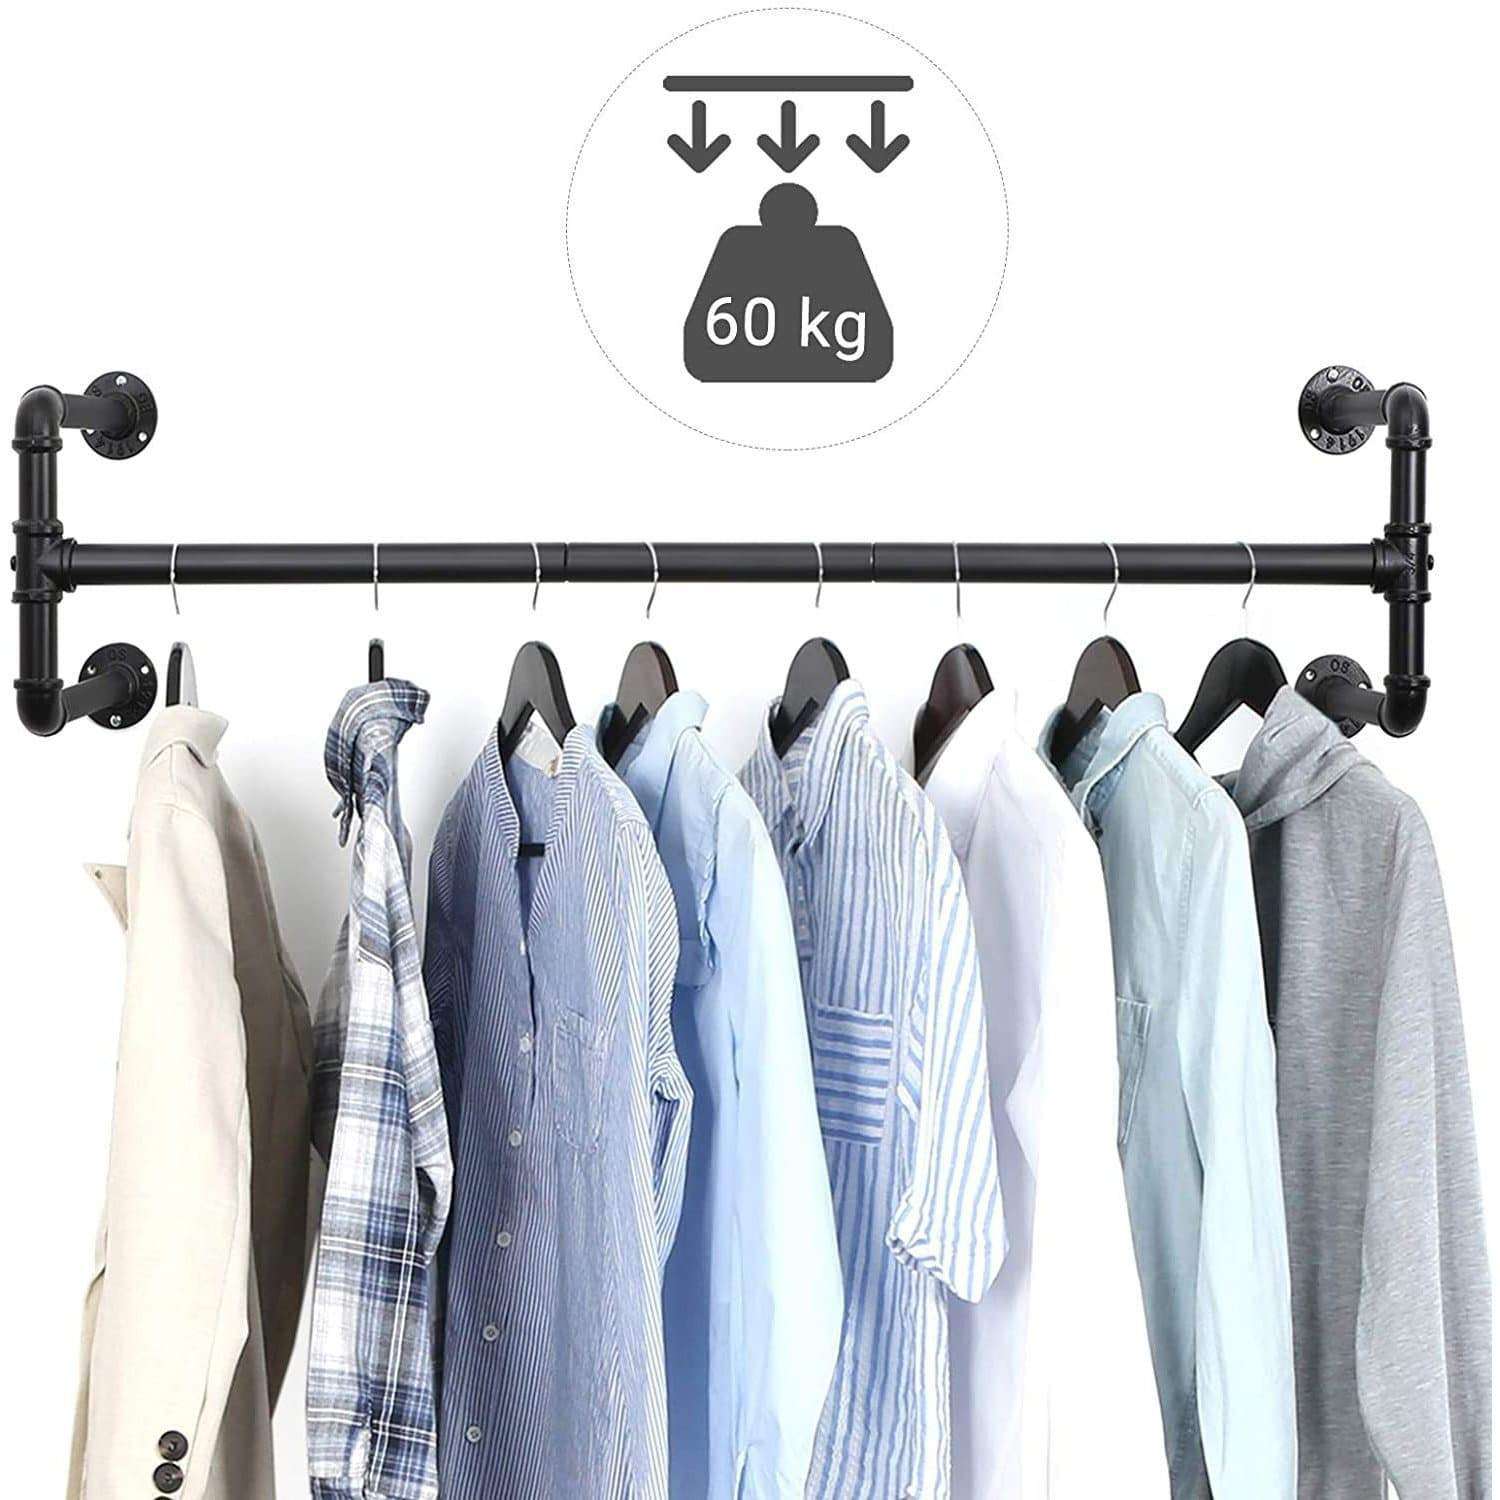 Nancy's Sonora Industrial Clothes Rack on the wall - Wall coat rack - Clothes racks - 110 x 30 x 29.3 CM